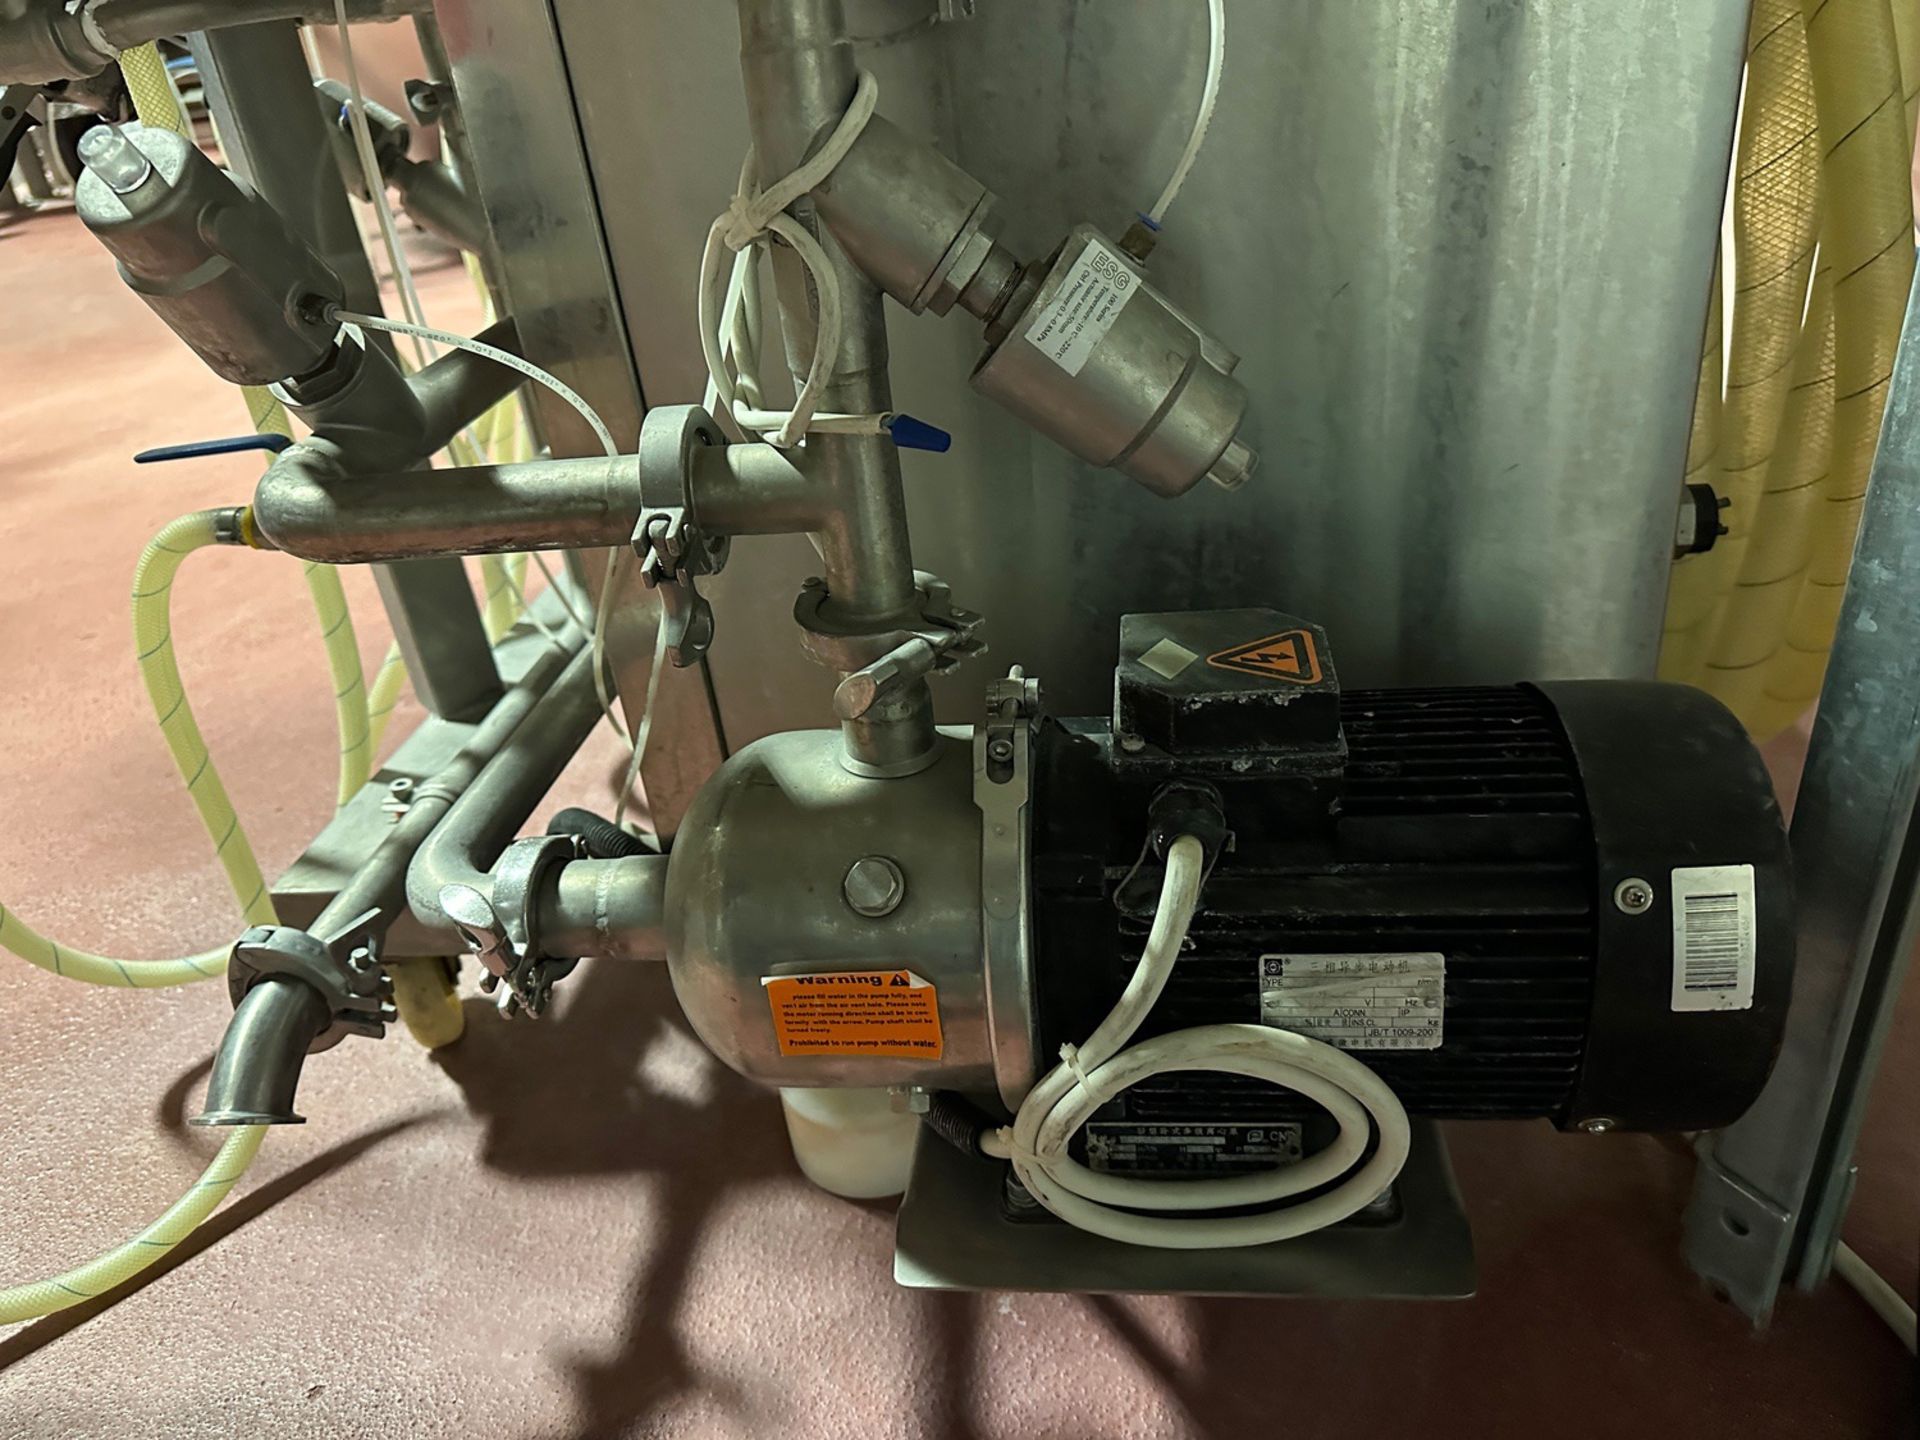 Stainless Steel Keg Washer with Seimens Smart Line Control Panel | Rig Fee $350 - Image 5 of 7